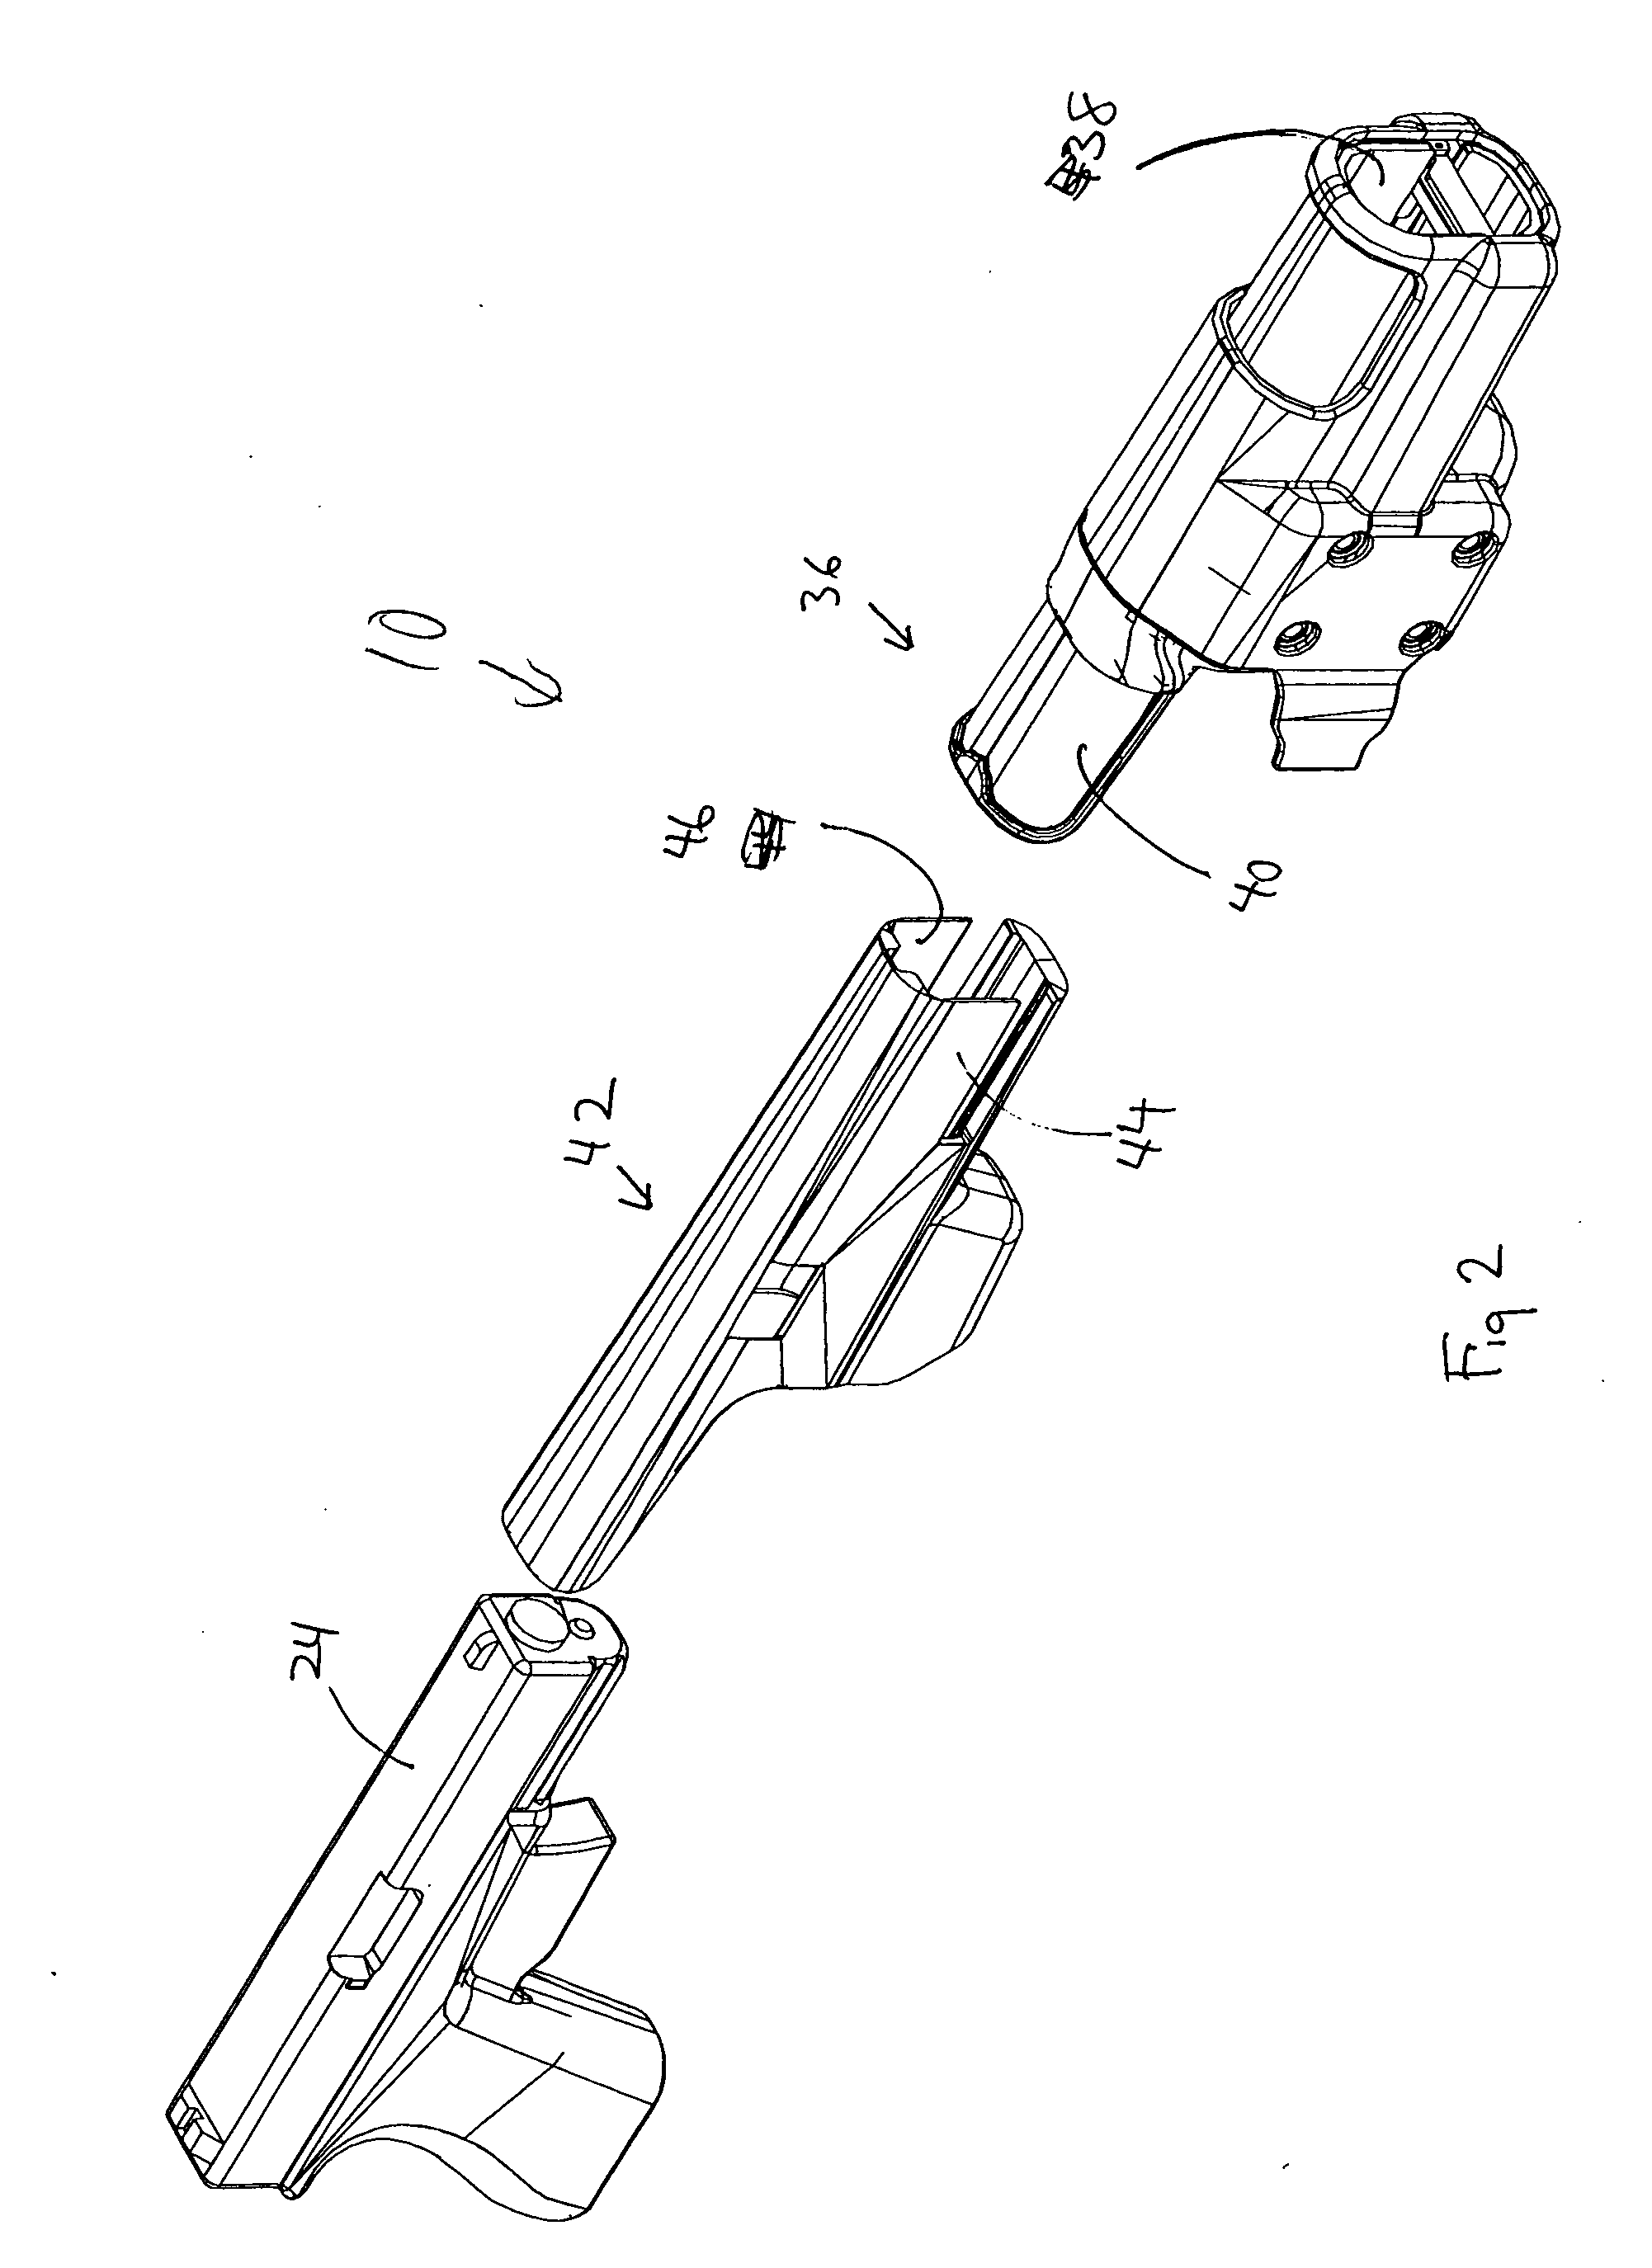 Holster manufacturing system and method of making